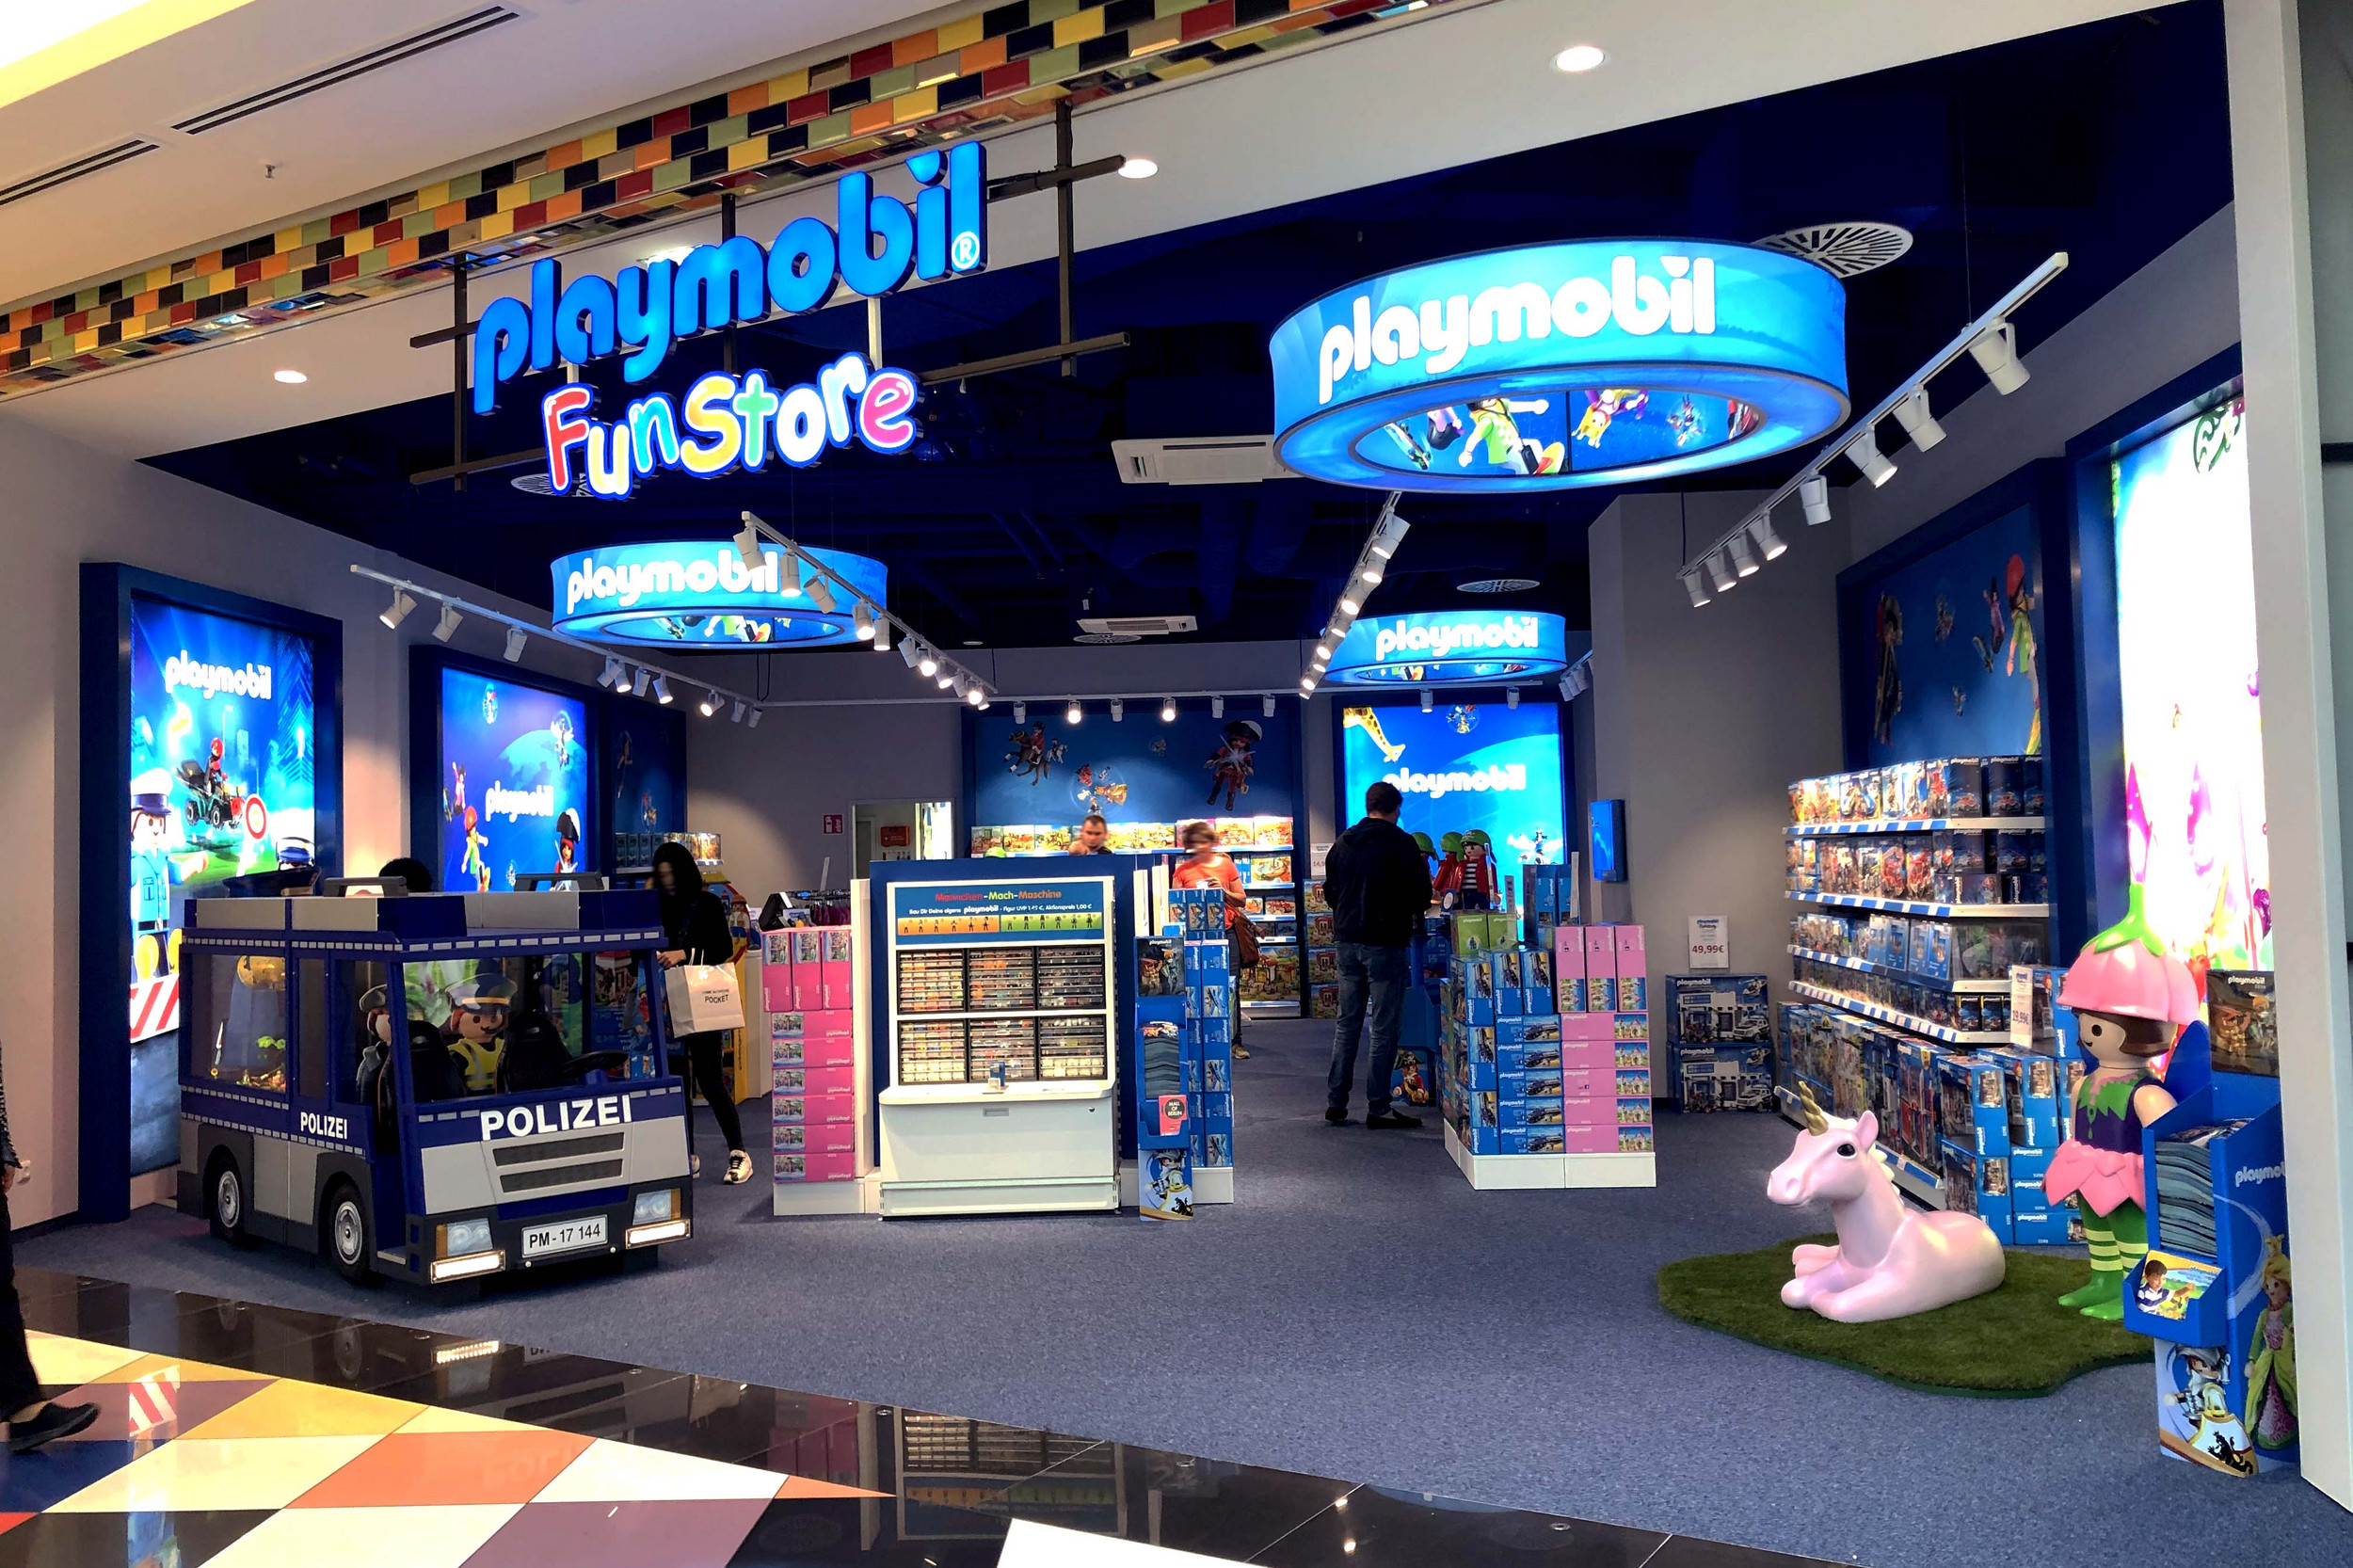 Playmobil Fun Store at the Mall of Berlin